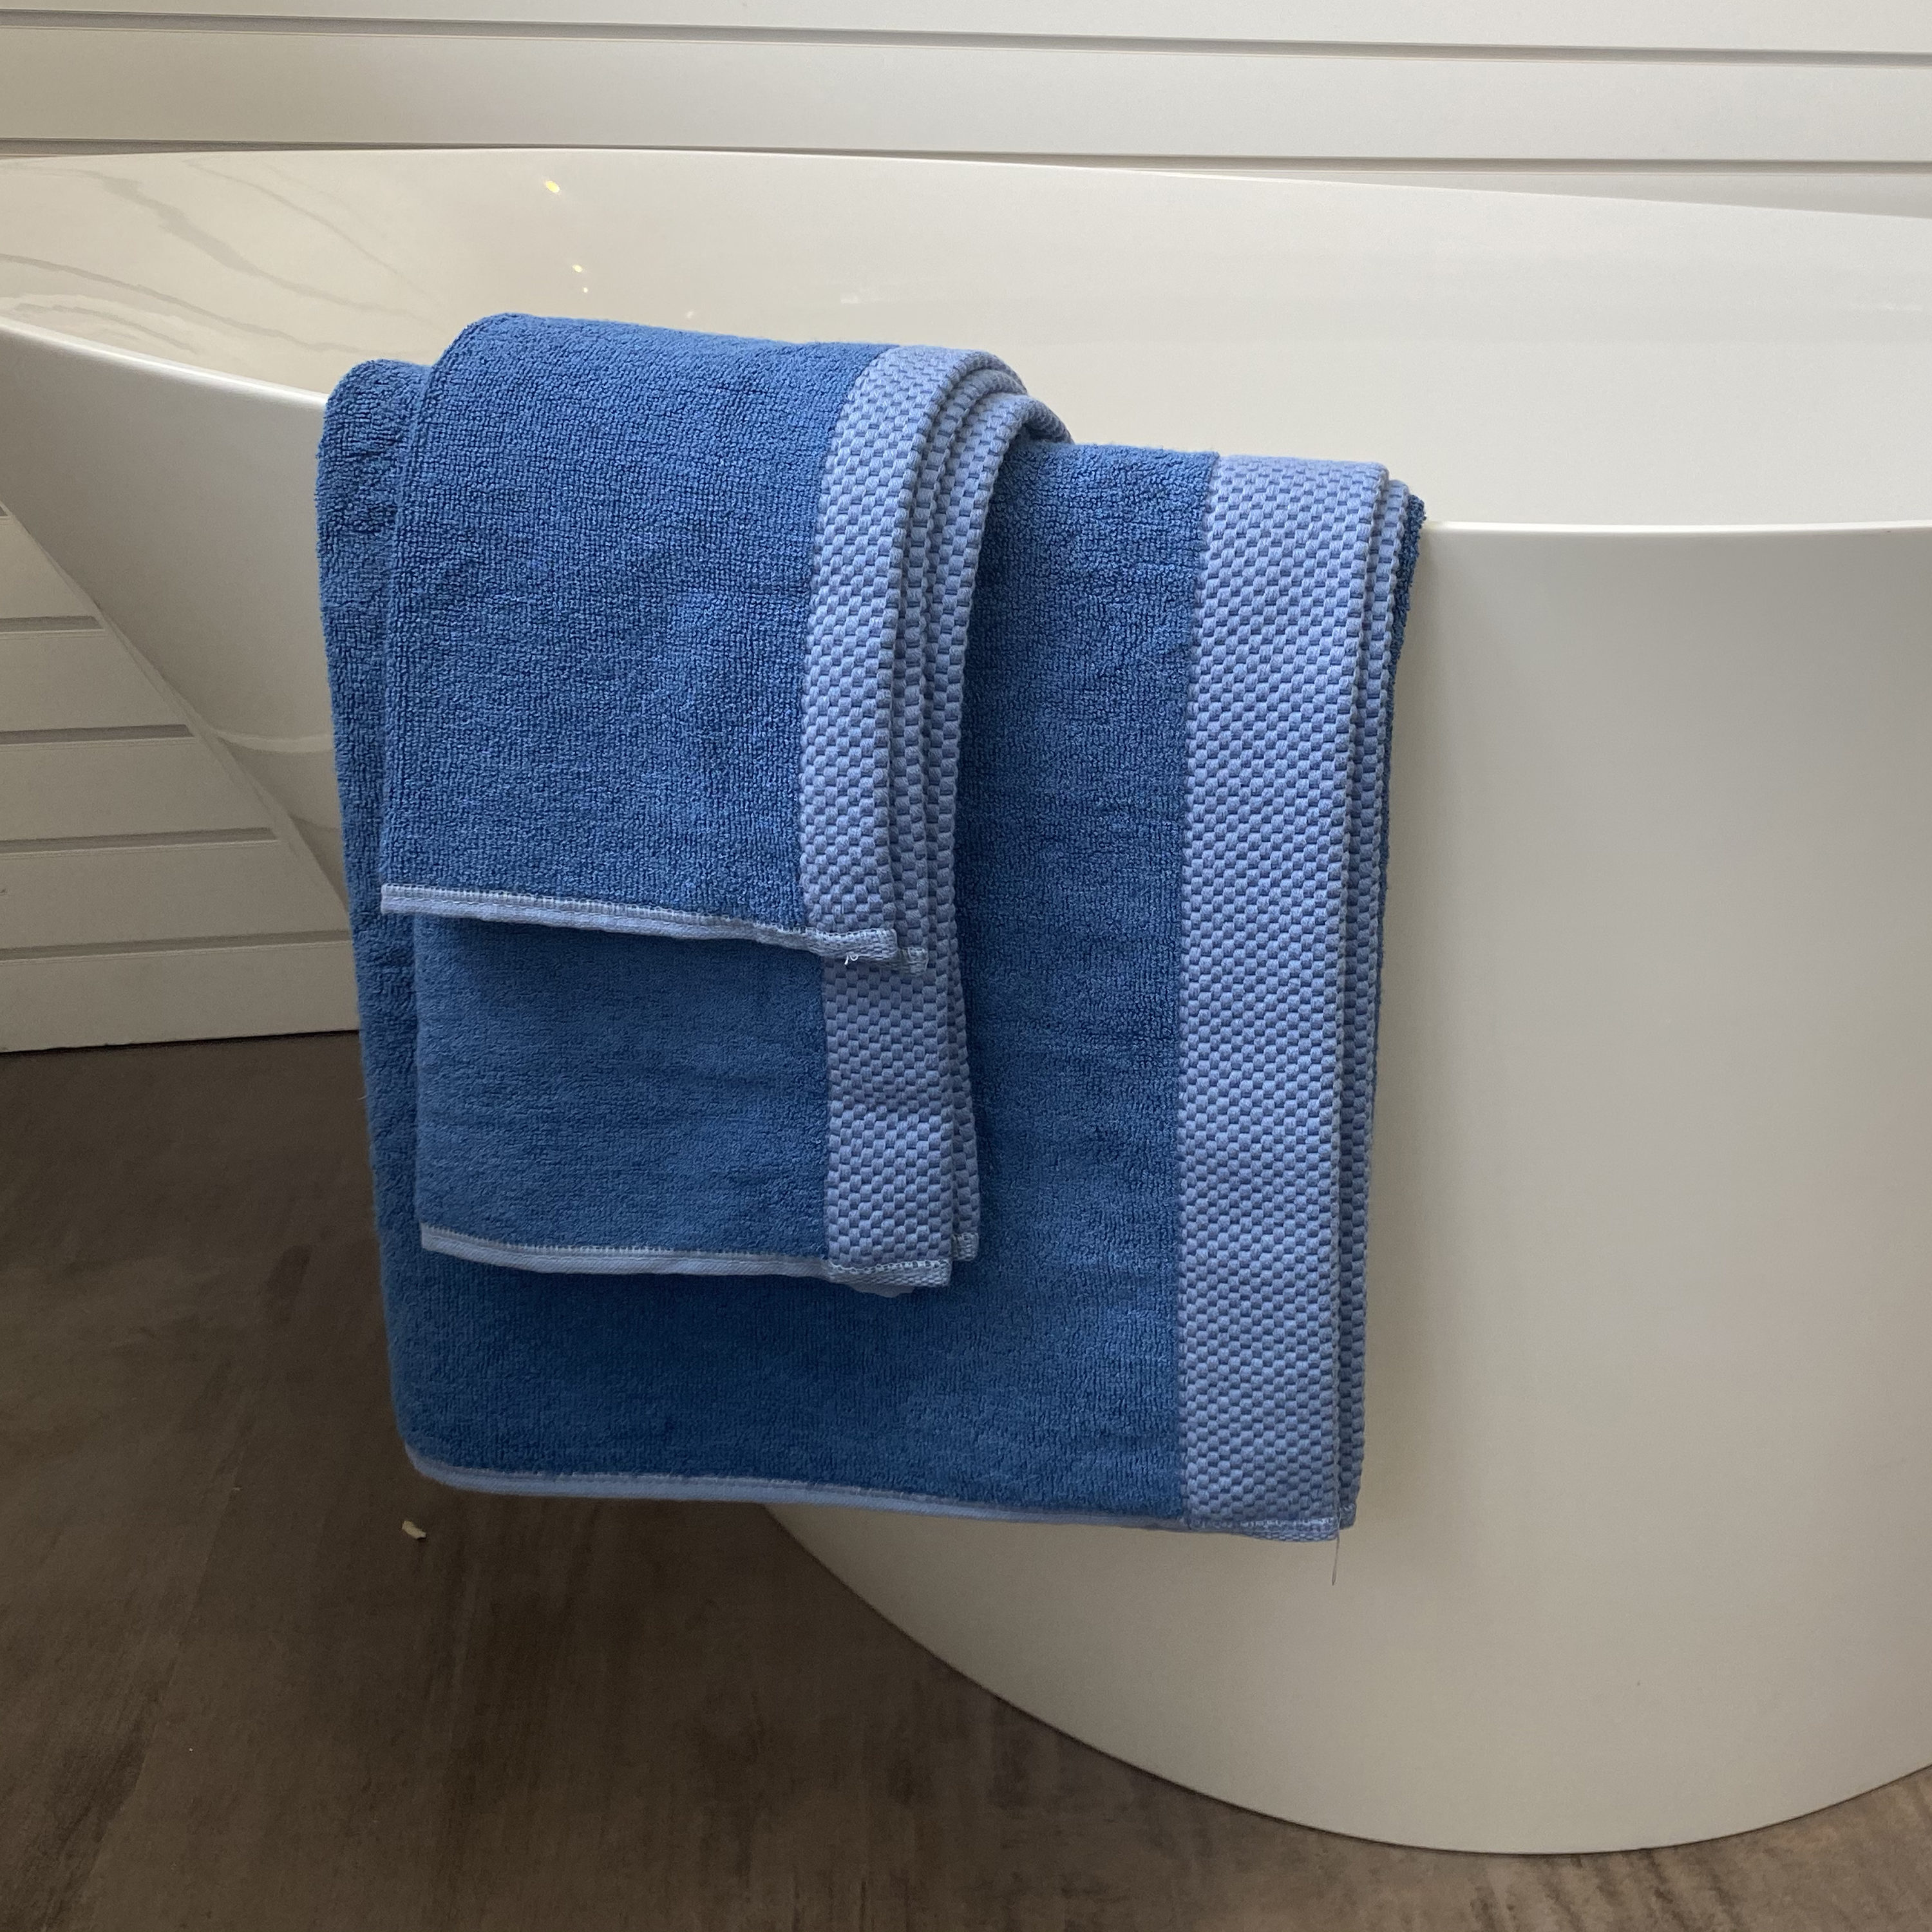 BedVoyage 3-Piece Indigo Viscose From Bamboo Quick Dry Bath Towel Set ( Luxury) in the Bathroom Towels department at